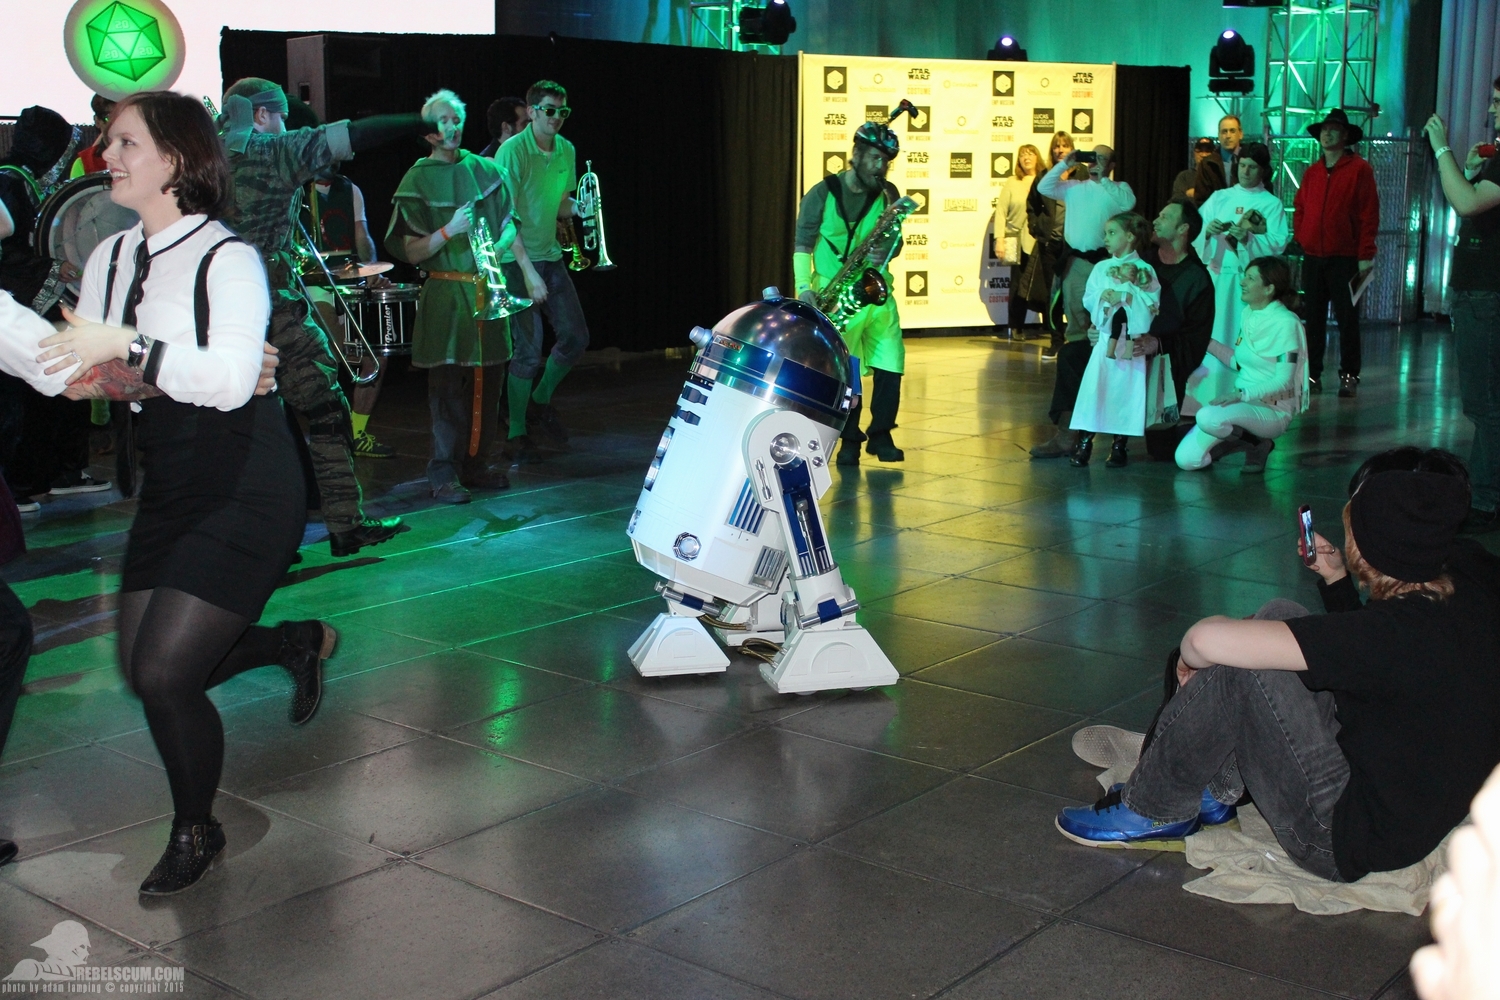 star-wars-the-power-of-costume-seattle-emp-museum-launch-party-013015-011.JPG